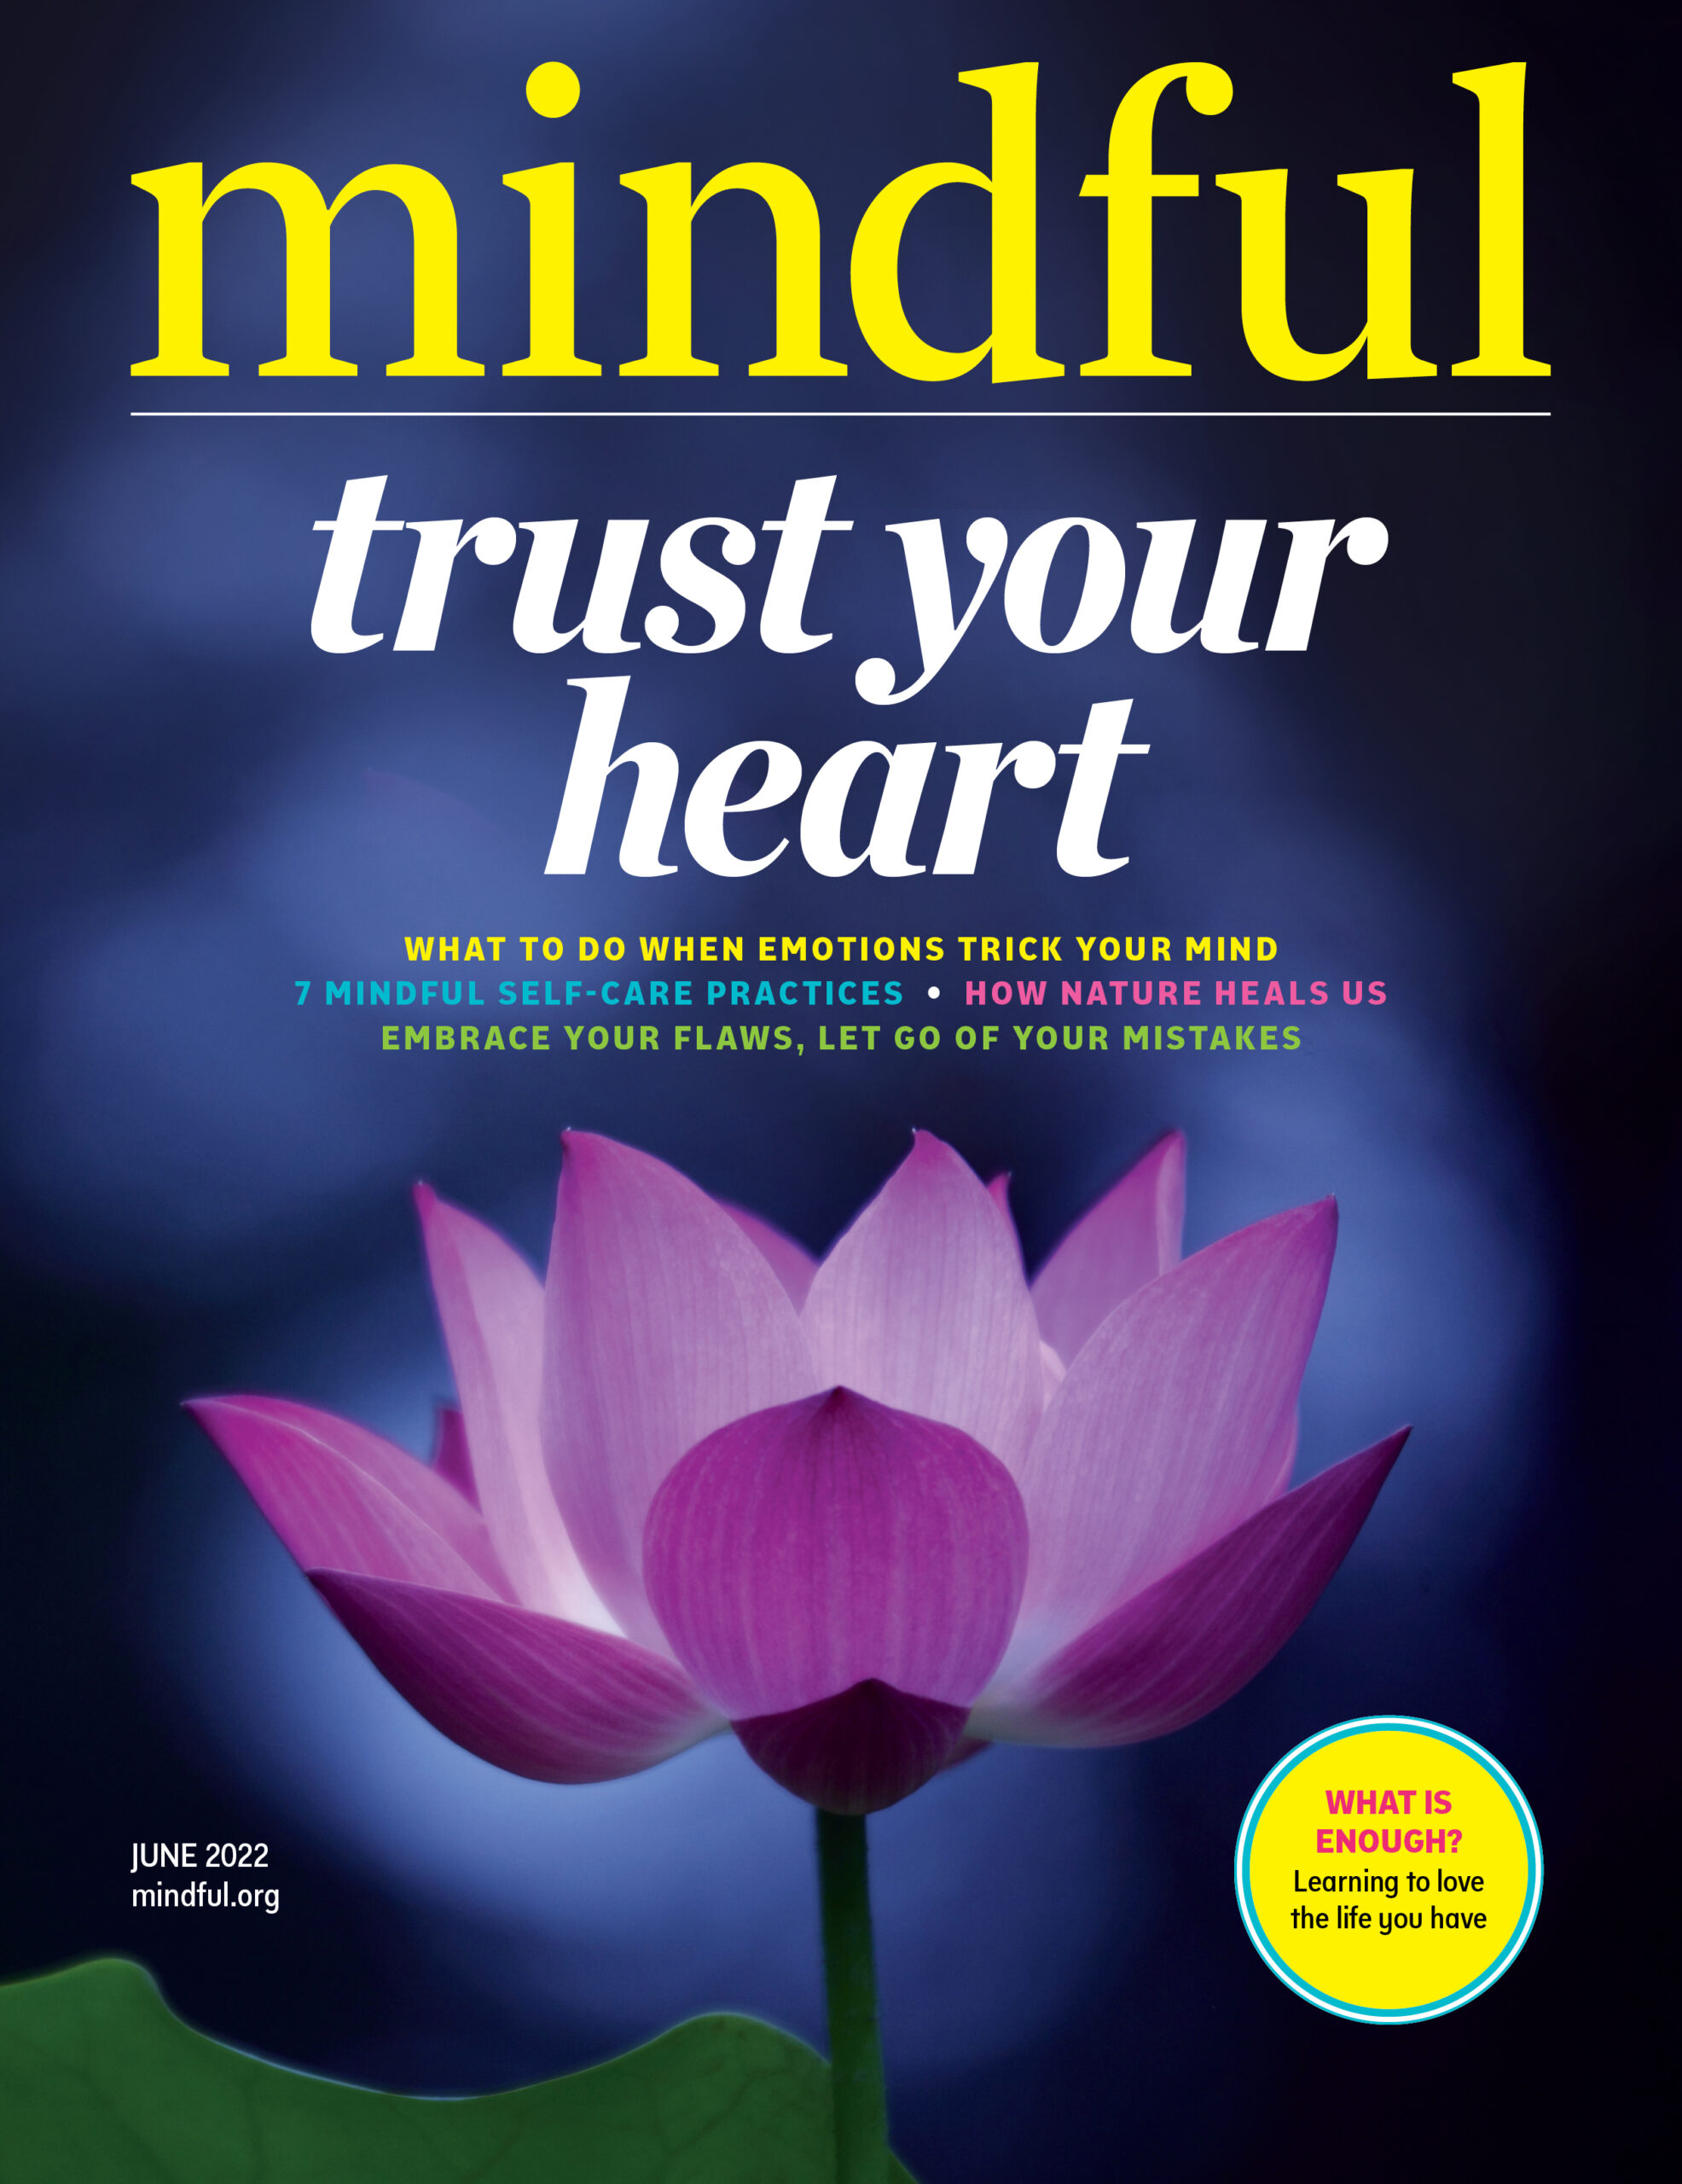 Mindful magazine - June 2022 - Trust your heart